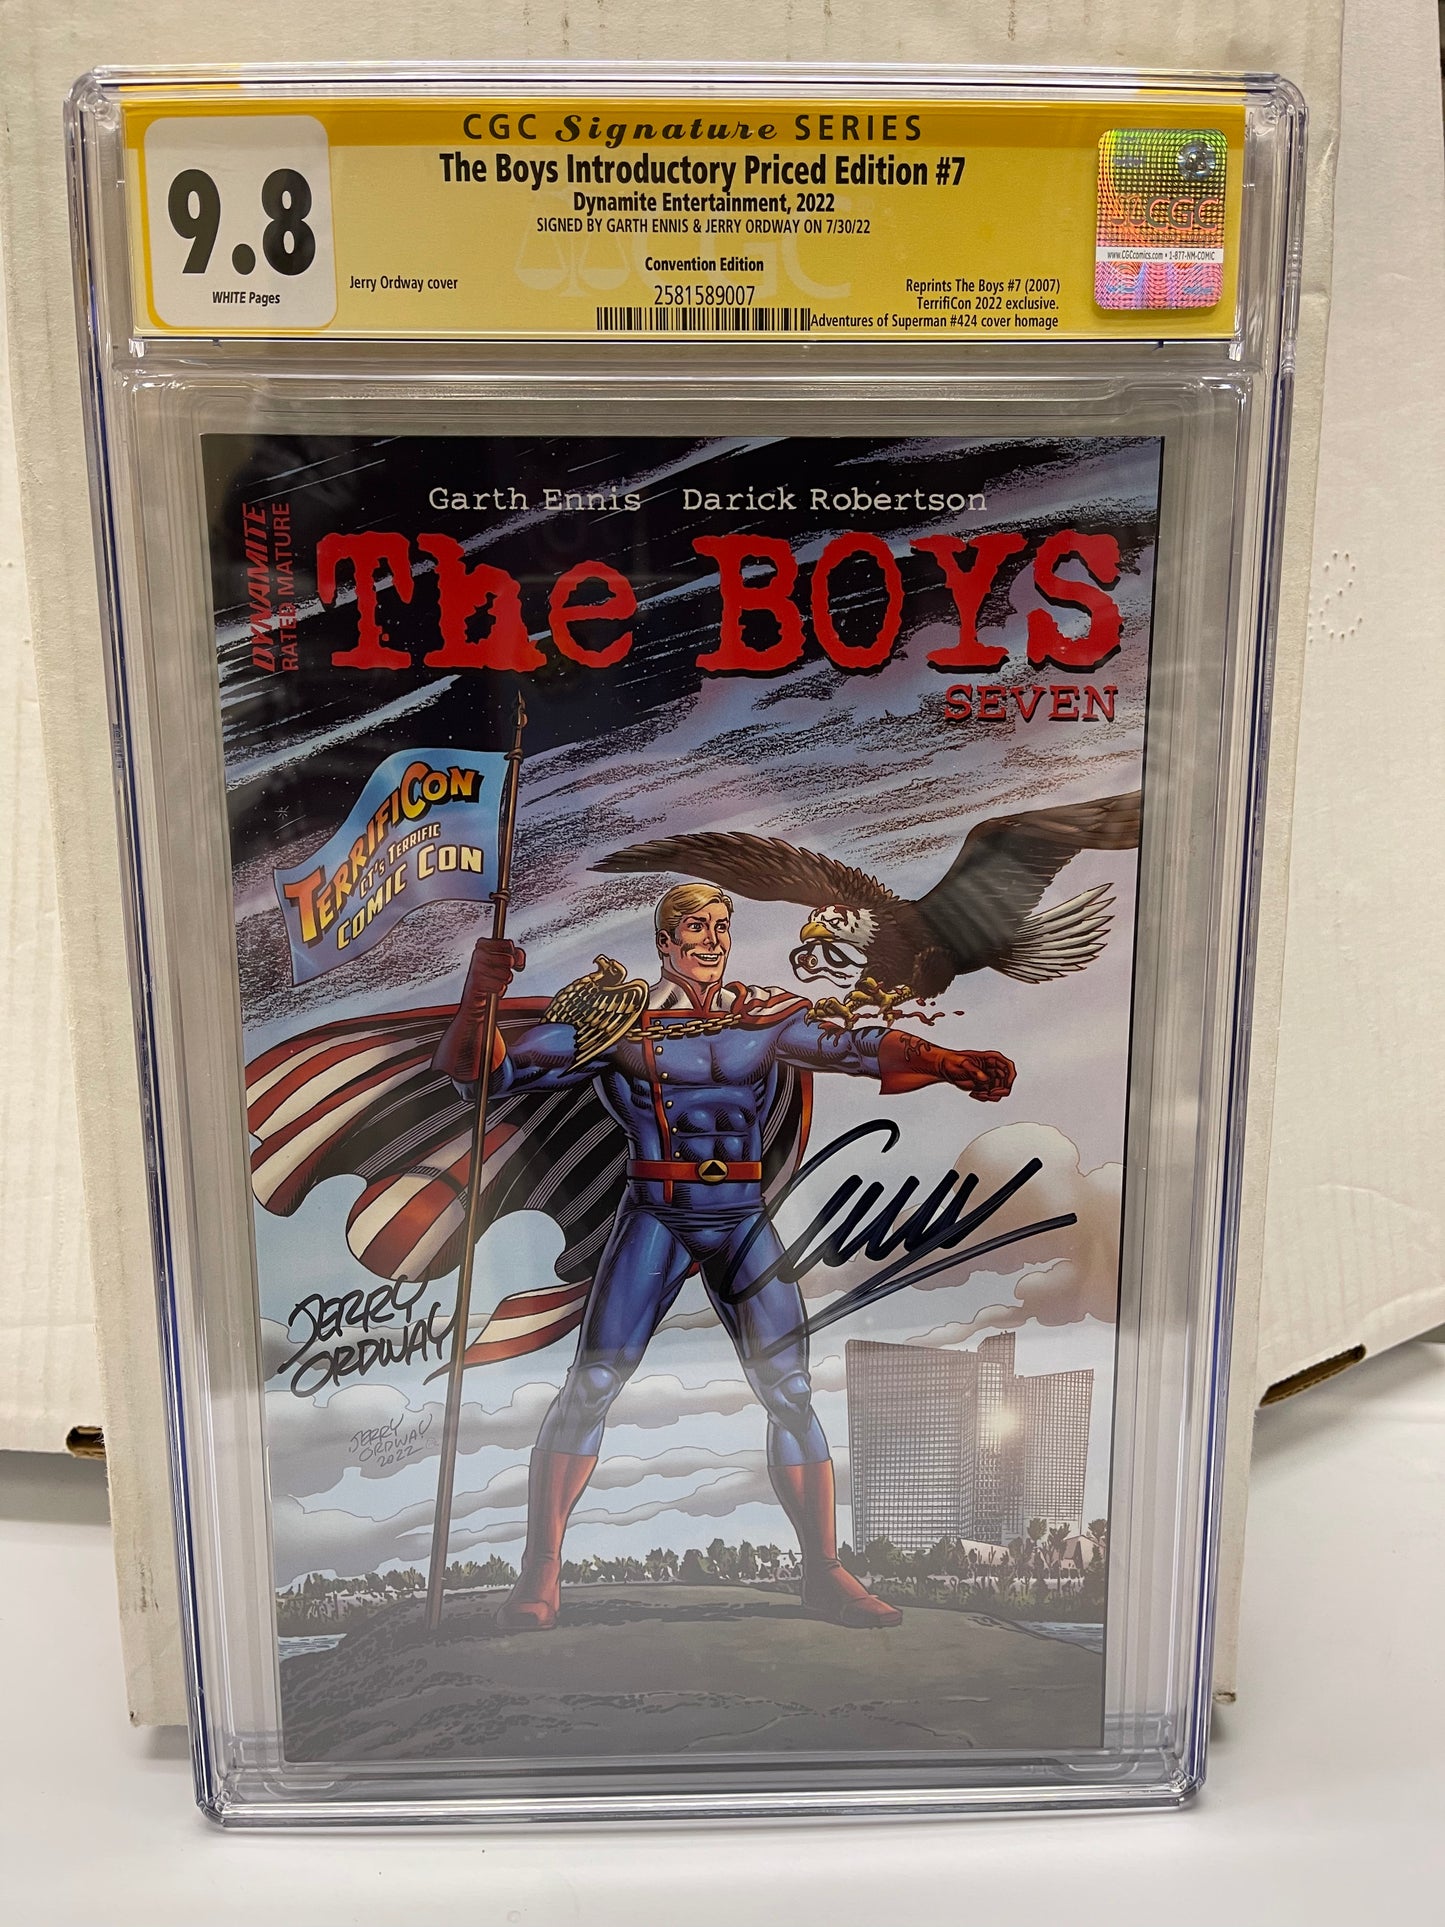 The Boys Indrotuctory Priced Edition #7 Terrificon Exclusive Variant CGC Signature Series